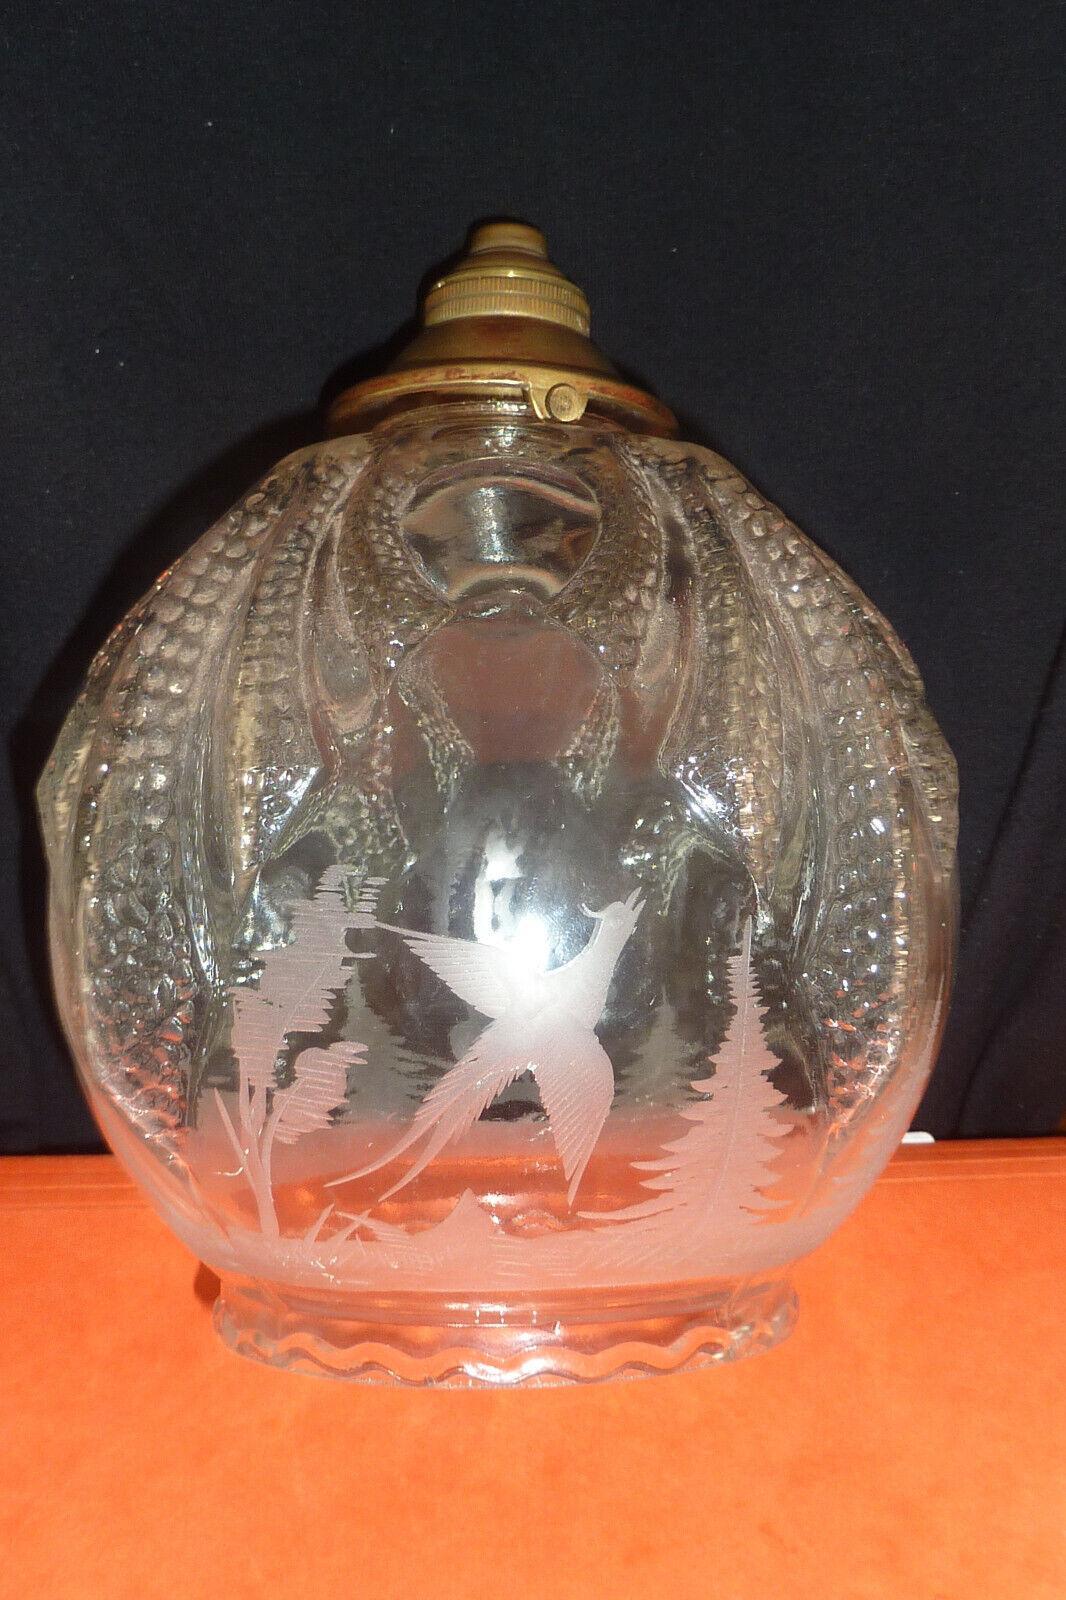 1920's French Art Deco Carved Crystal Ceiling Pendant/ Lantern. Featuring forest animals at play carved into the crystal. Please look closely at pictures. This ia rare treasure.